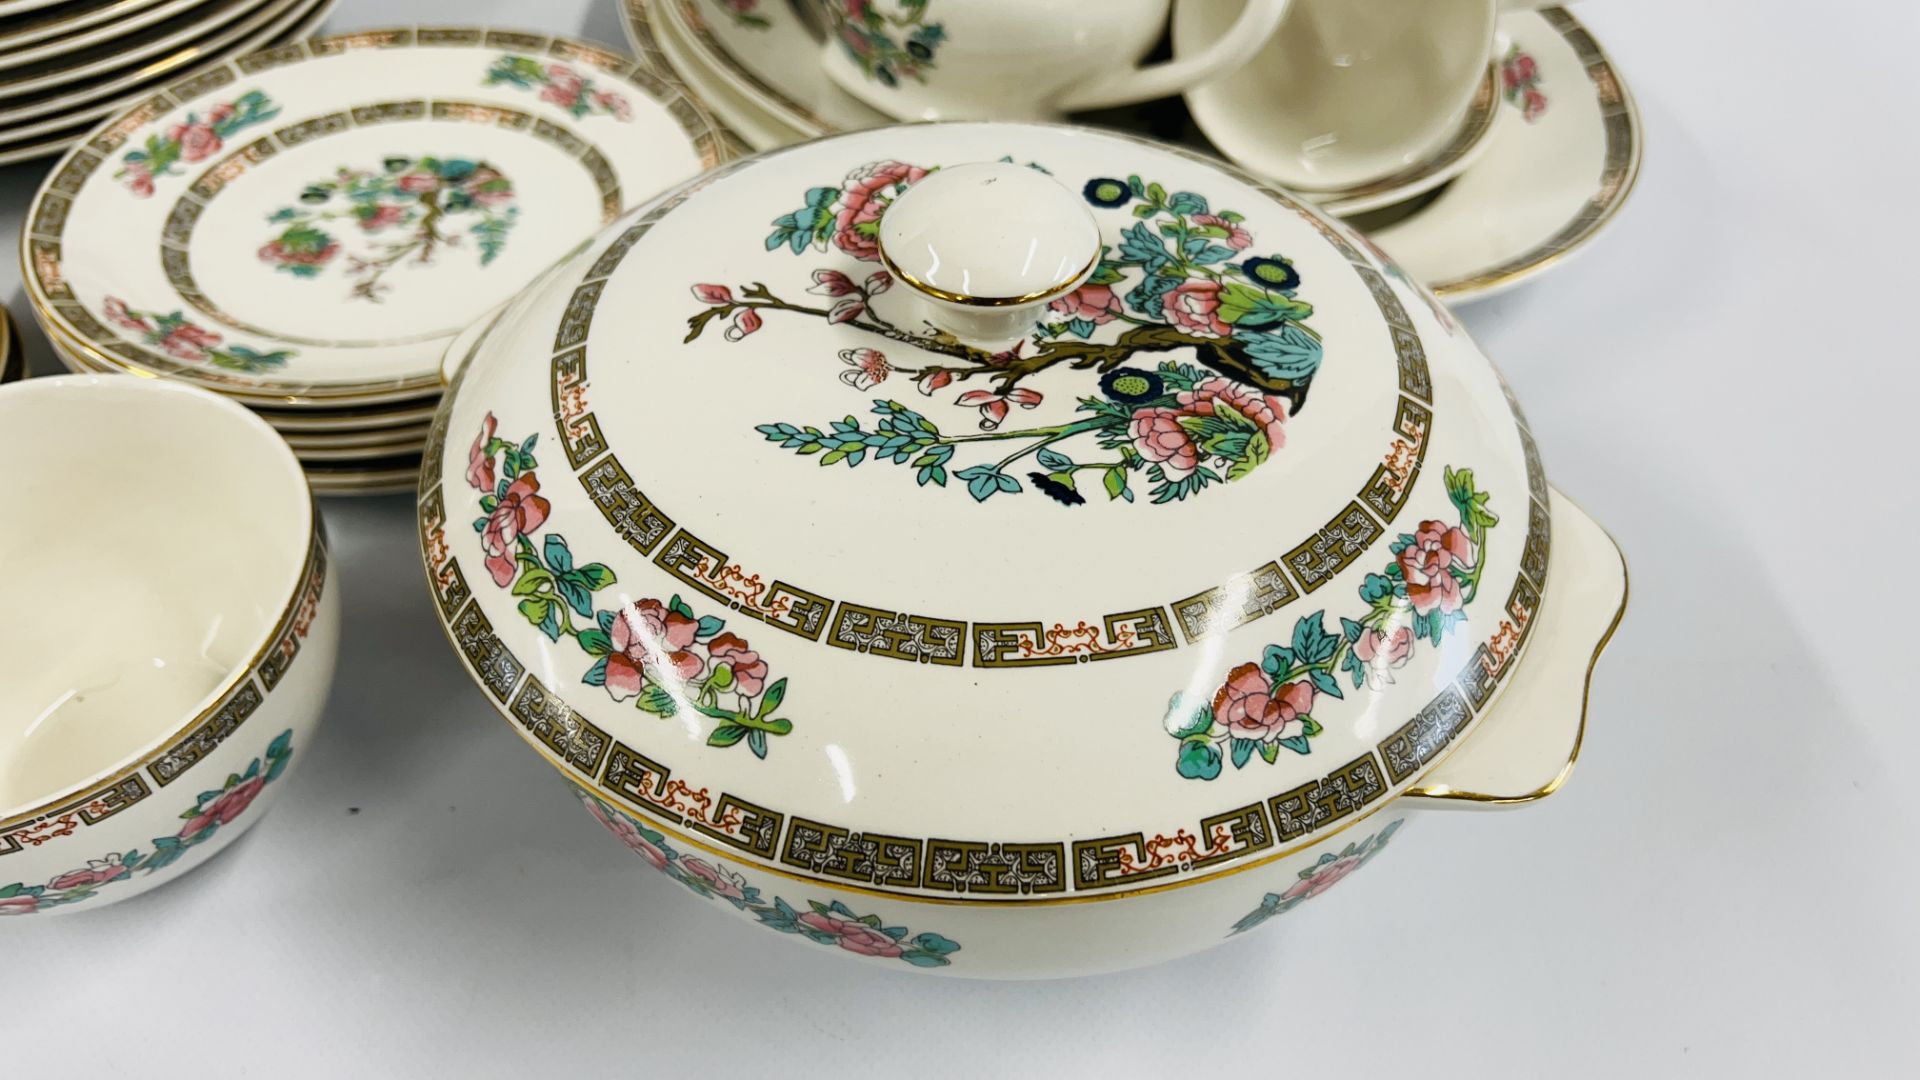 55 PIECES OF WEDGEWOOD INDIAN TREE DINNERWARE INCLUDING PLATES, CUPS, SAUCERS, TUREENS ETC. - Image 2 of 10